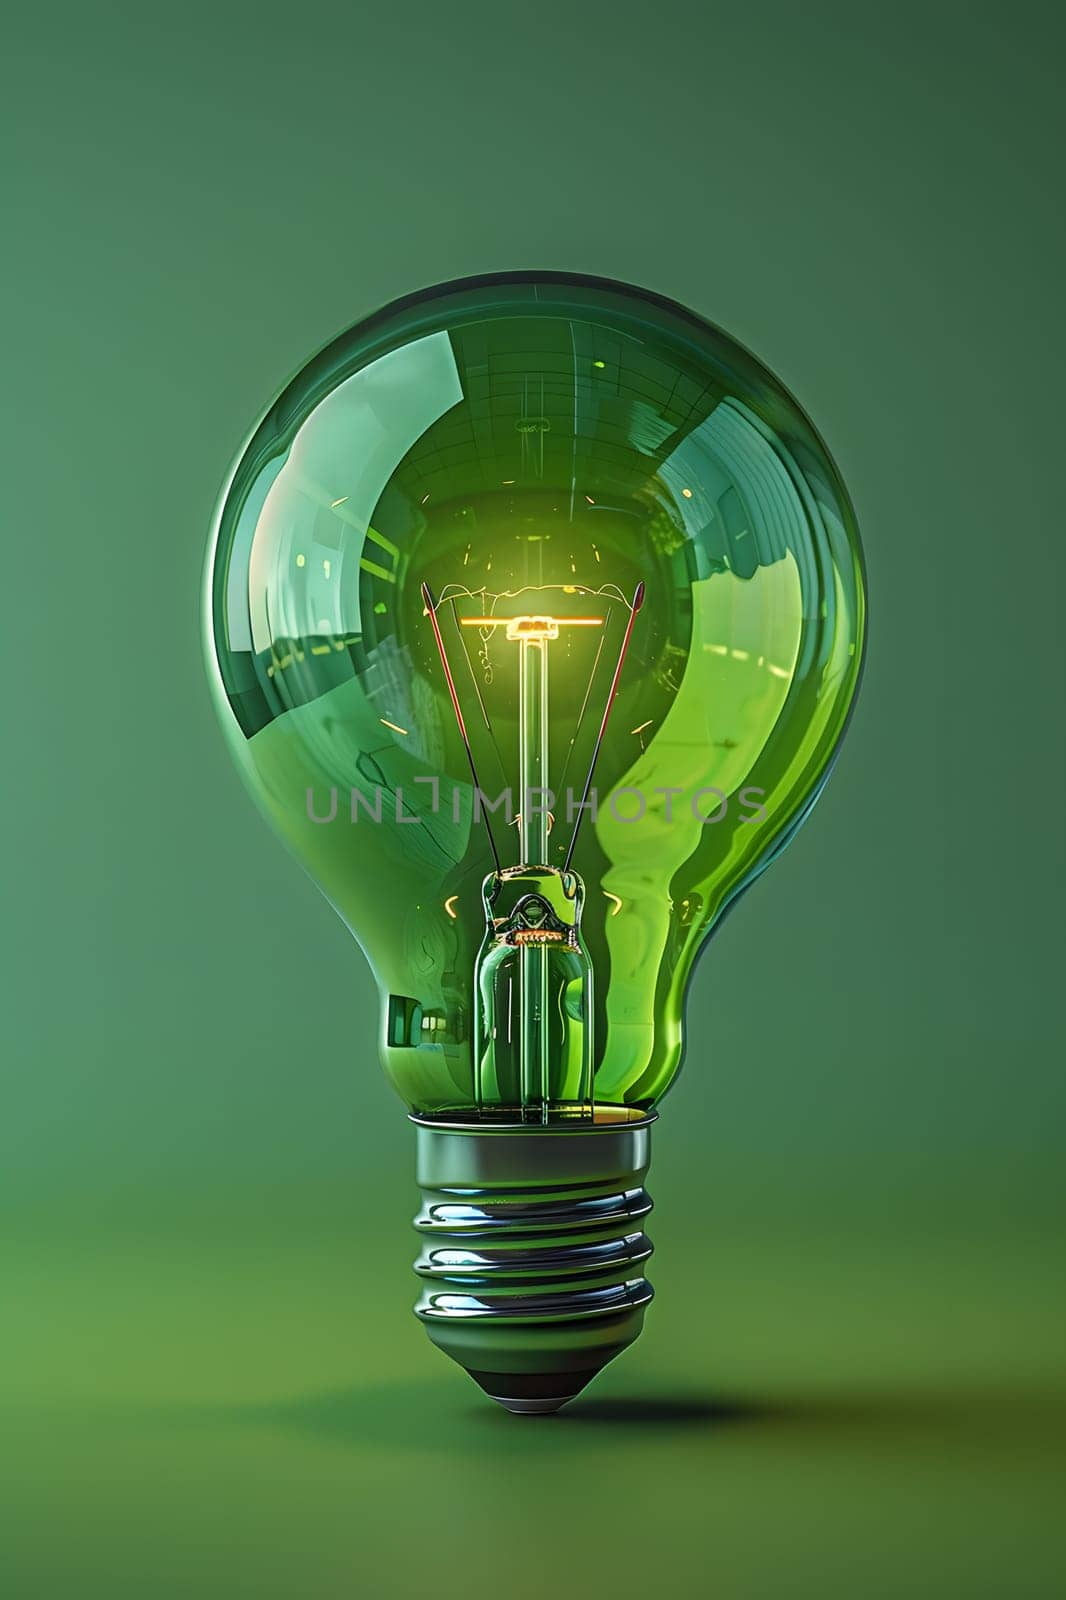 A green fluorescent lamp is resting on a green table surface by Nadtochiy